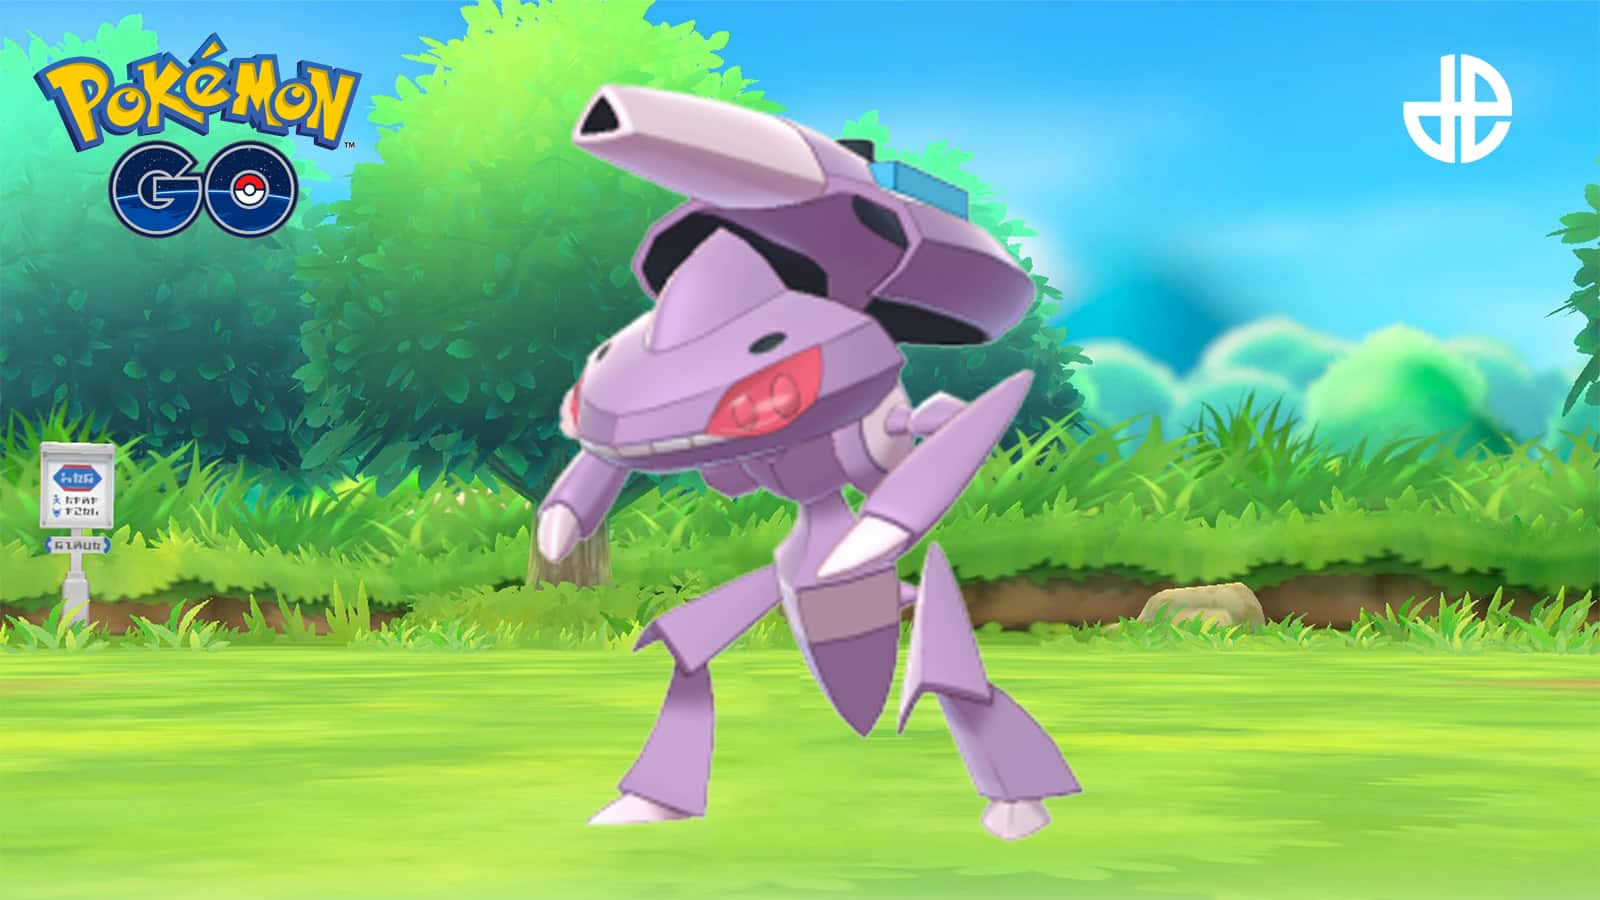 Porygon-Z now learns Techno Blast and changes type to Normal/[held Drive],  with there now being one for each type (including Normal). Genesect does  not change type but receives all other applicable benefits.